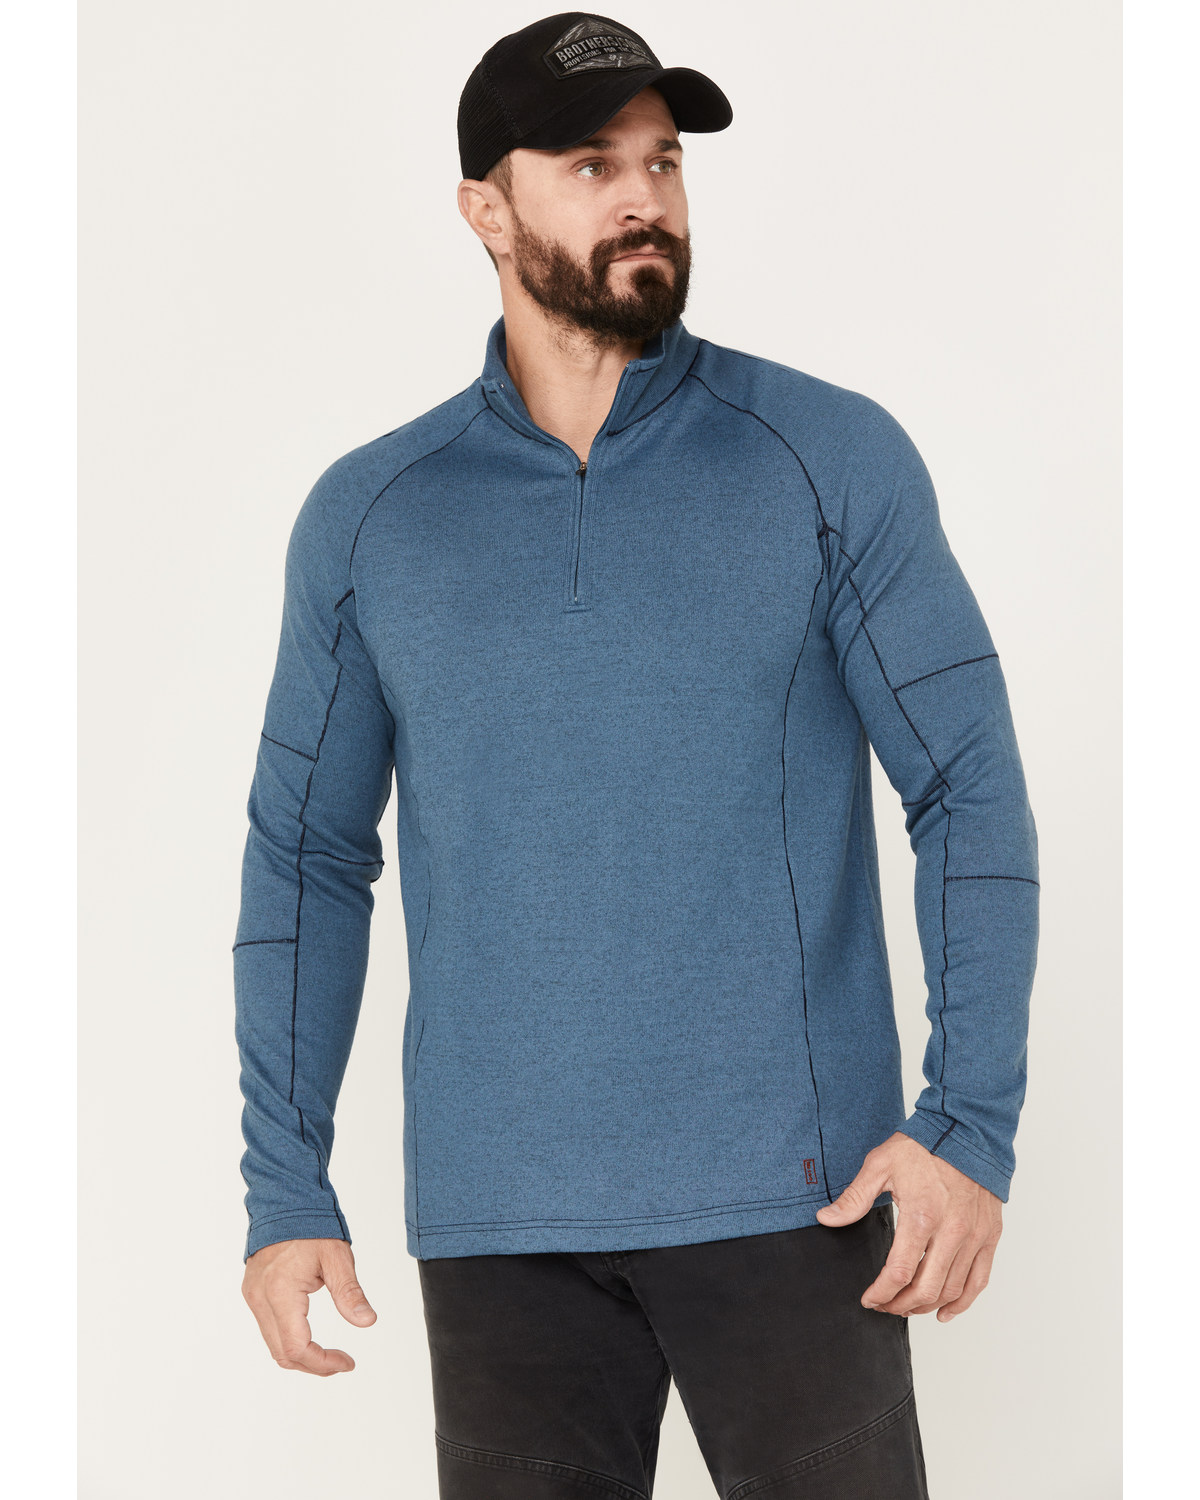 Brothers and Sons Men's Base Layer Quarter Zip Shirt